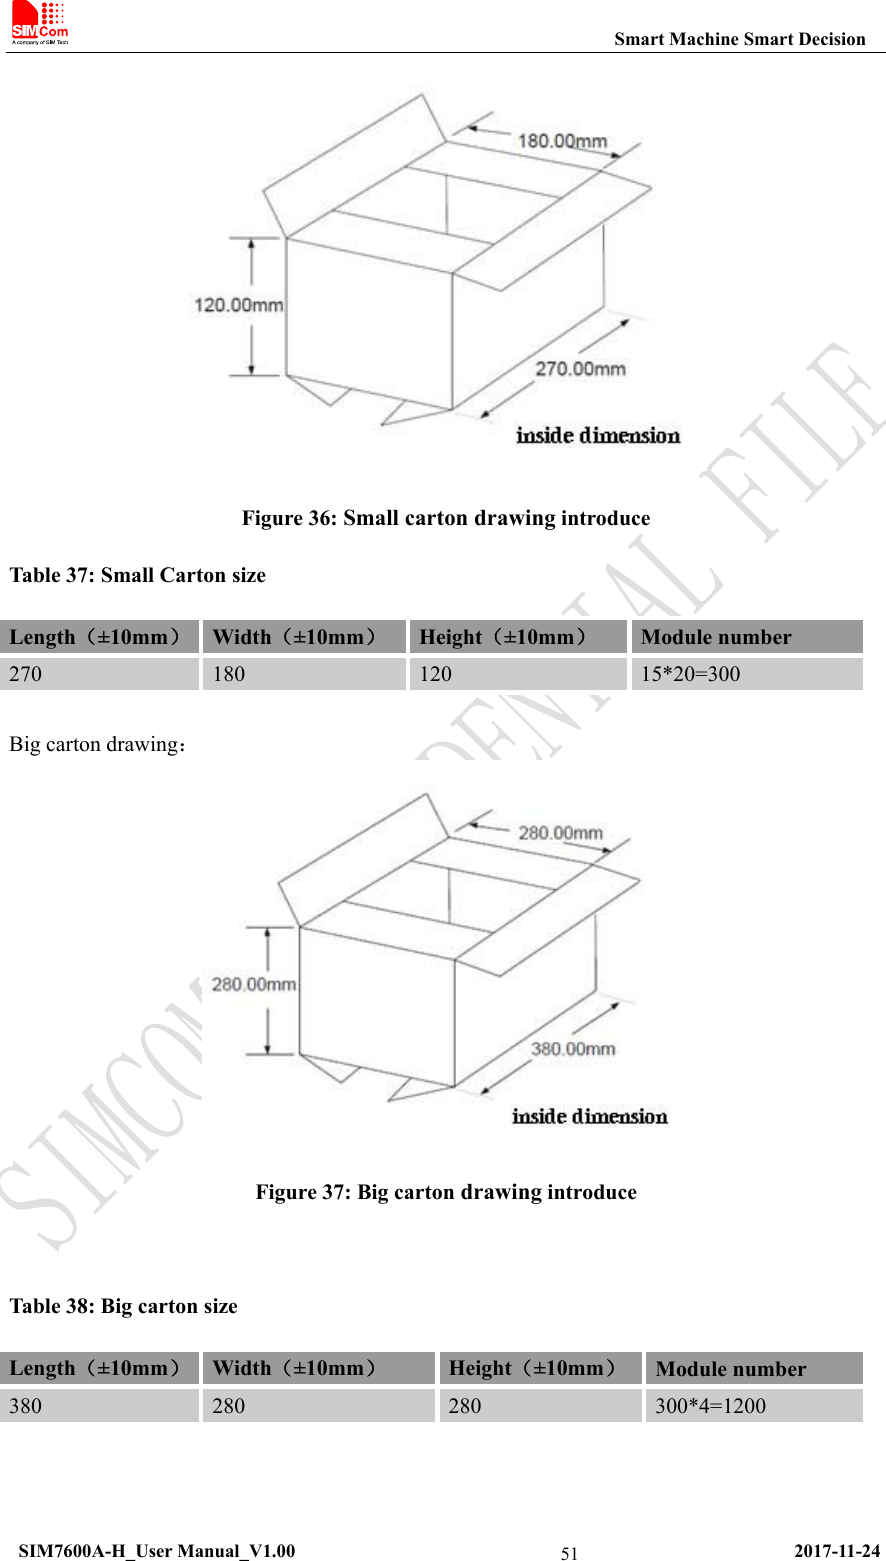                                                           Smart Machine Smart Decision  SIM7600A-H_User Manual_V1.00                                                     2017-11-24 51 Figure 36: Small carton drawing introduce Table 37: Small Carton size Length（±10mm） Width（±10mm） Height（±10mm） Module number 270  180  120  15*20=300  Big carton drawing：  Figure 37: Big carton drawing introduce  Table 38: Big carton size Length（±10mm） Width（±10mm） Height（±10mm）Module number 380  280  280  300*4=1200   